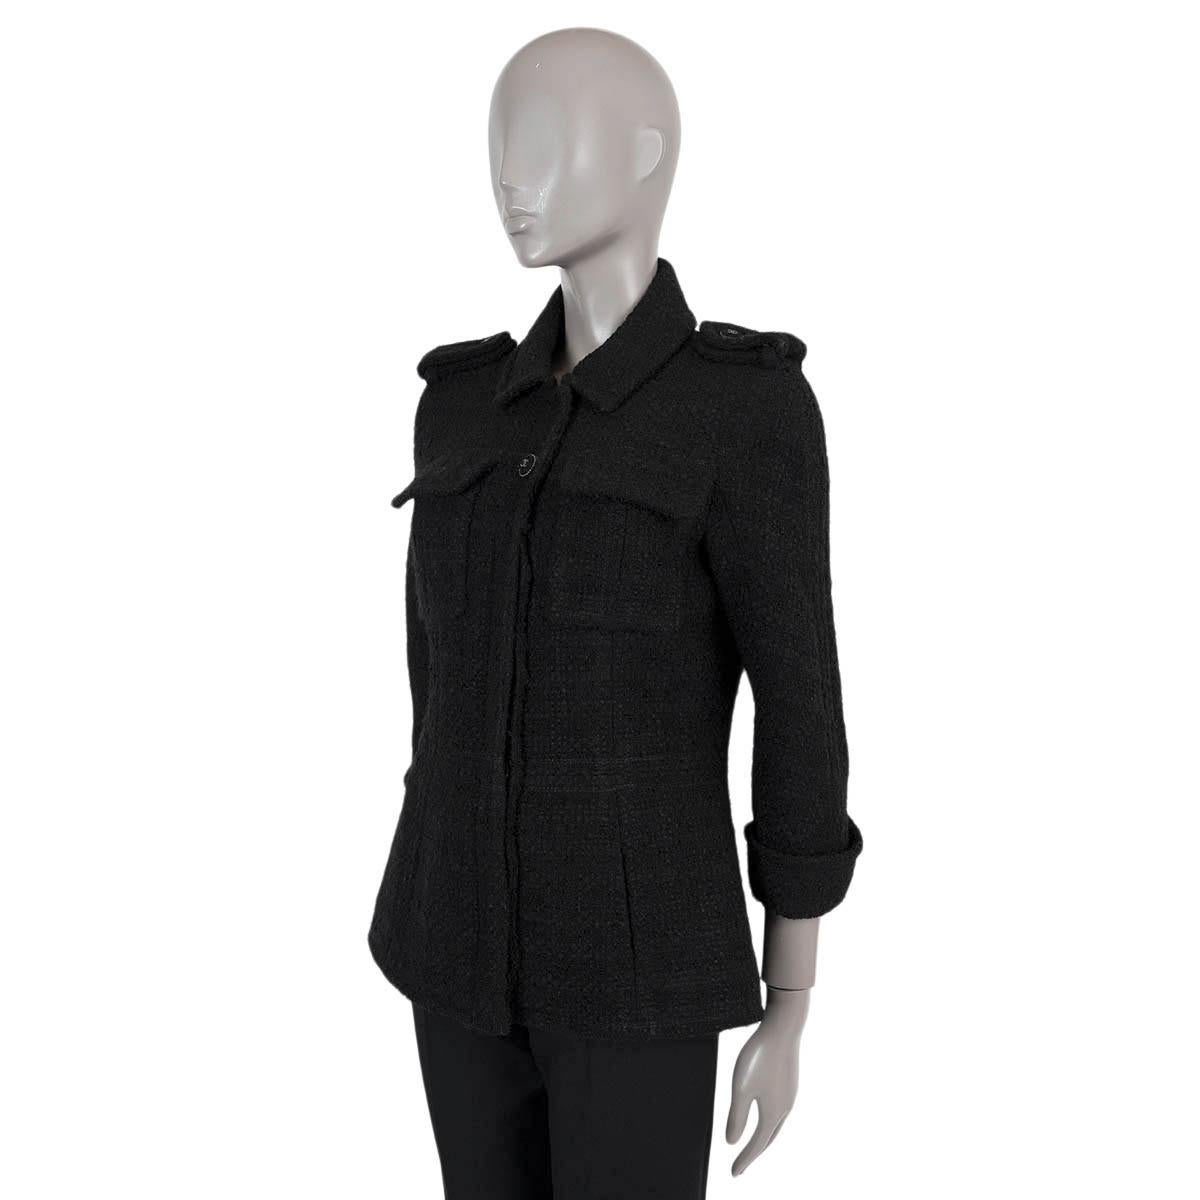 100% authentic Chanel little black tweed jacket in wool (93%) and polyamide (7%). Features a tailored silhouette, epauplettes, 3/4 cuffed sleeves and two flap chest pockets. Closes with CC buttons on the front and is lined in silk (100%). Has been